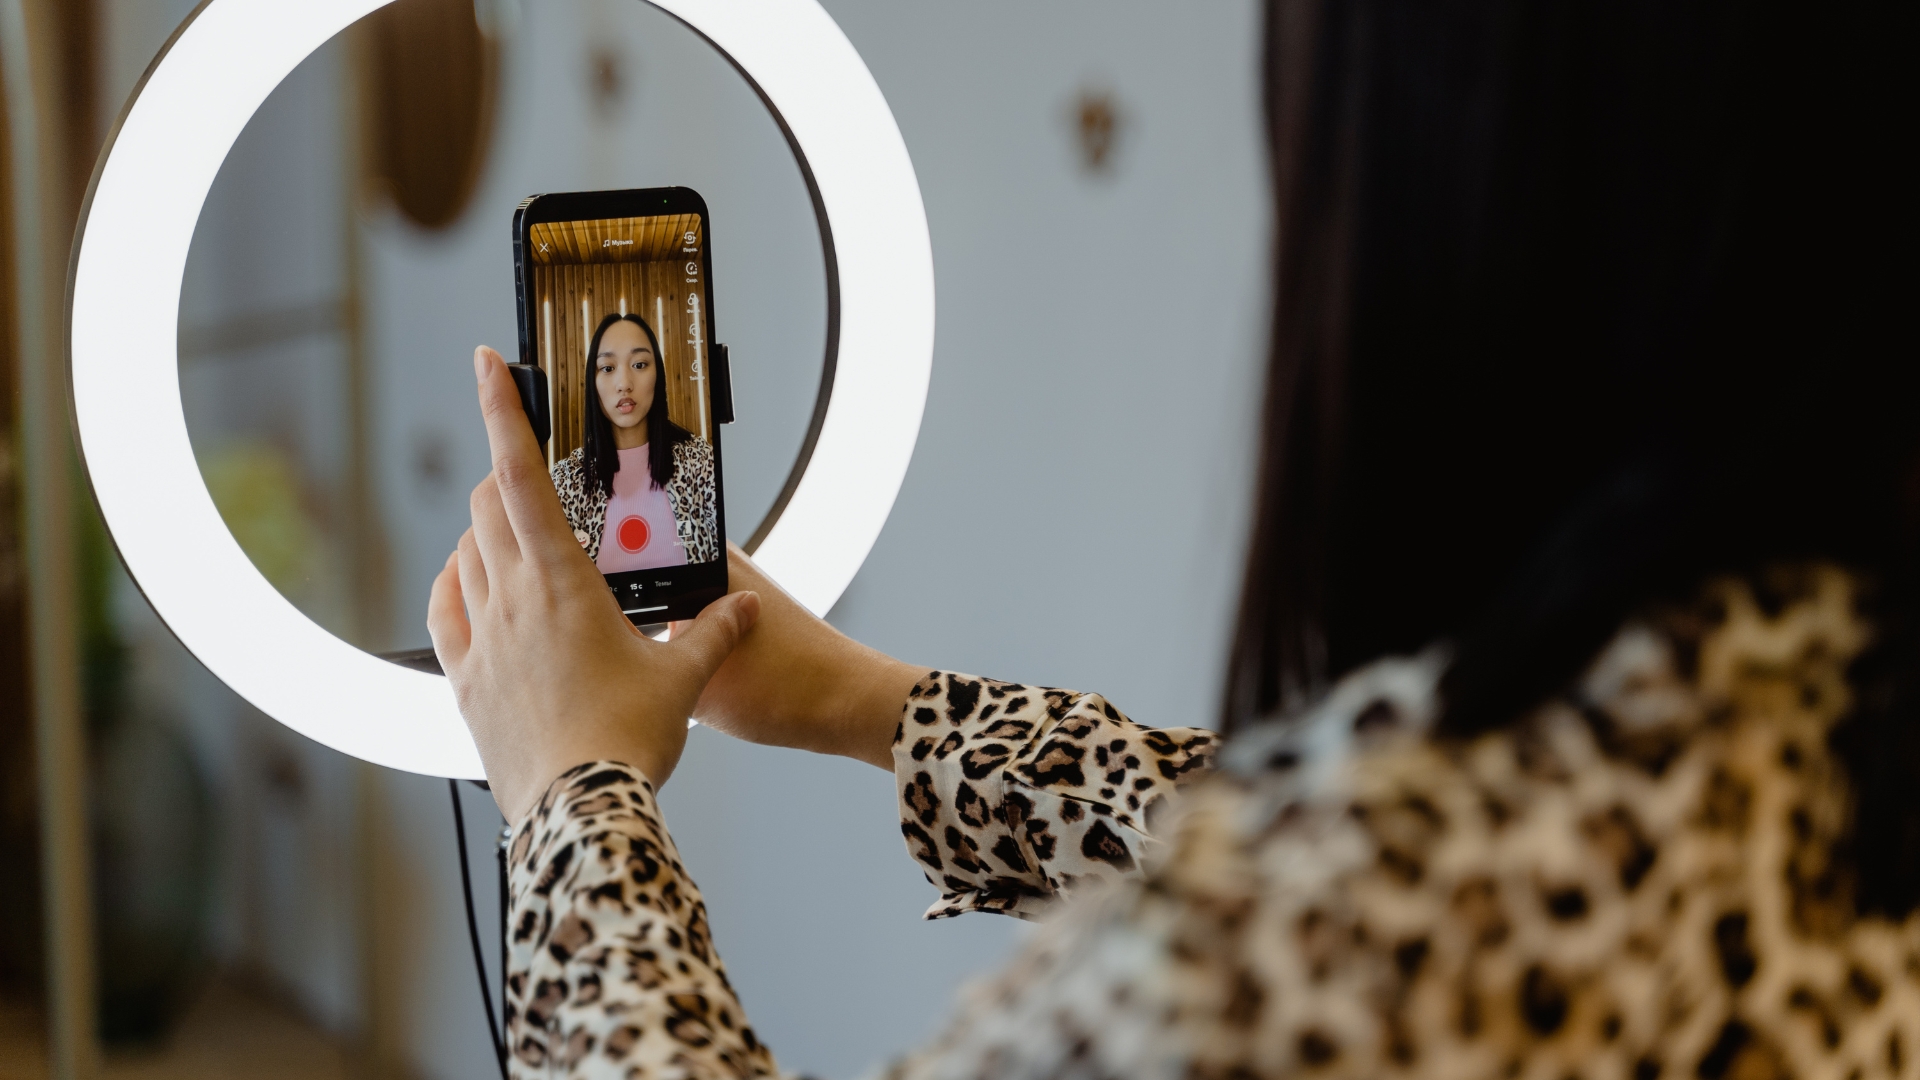 A female influencer wearing a leopard dress is creating engaging trendy content using her cellphone with the help of ringlight on the TikTok app.